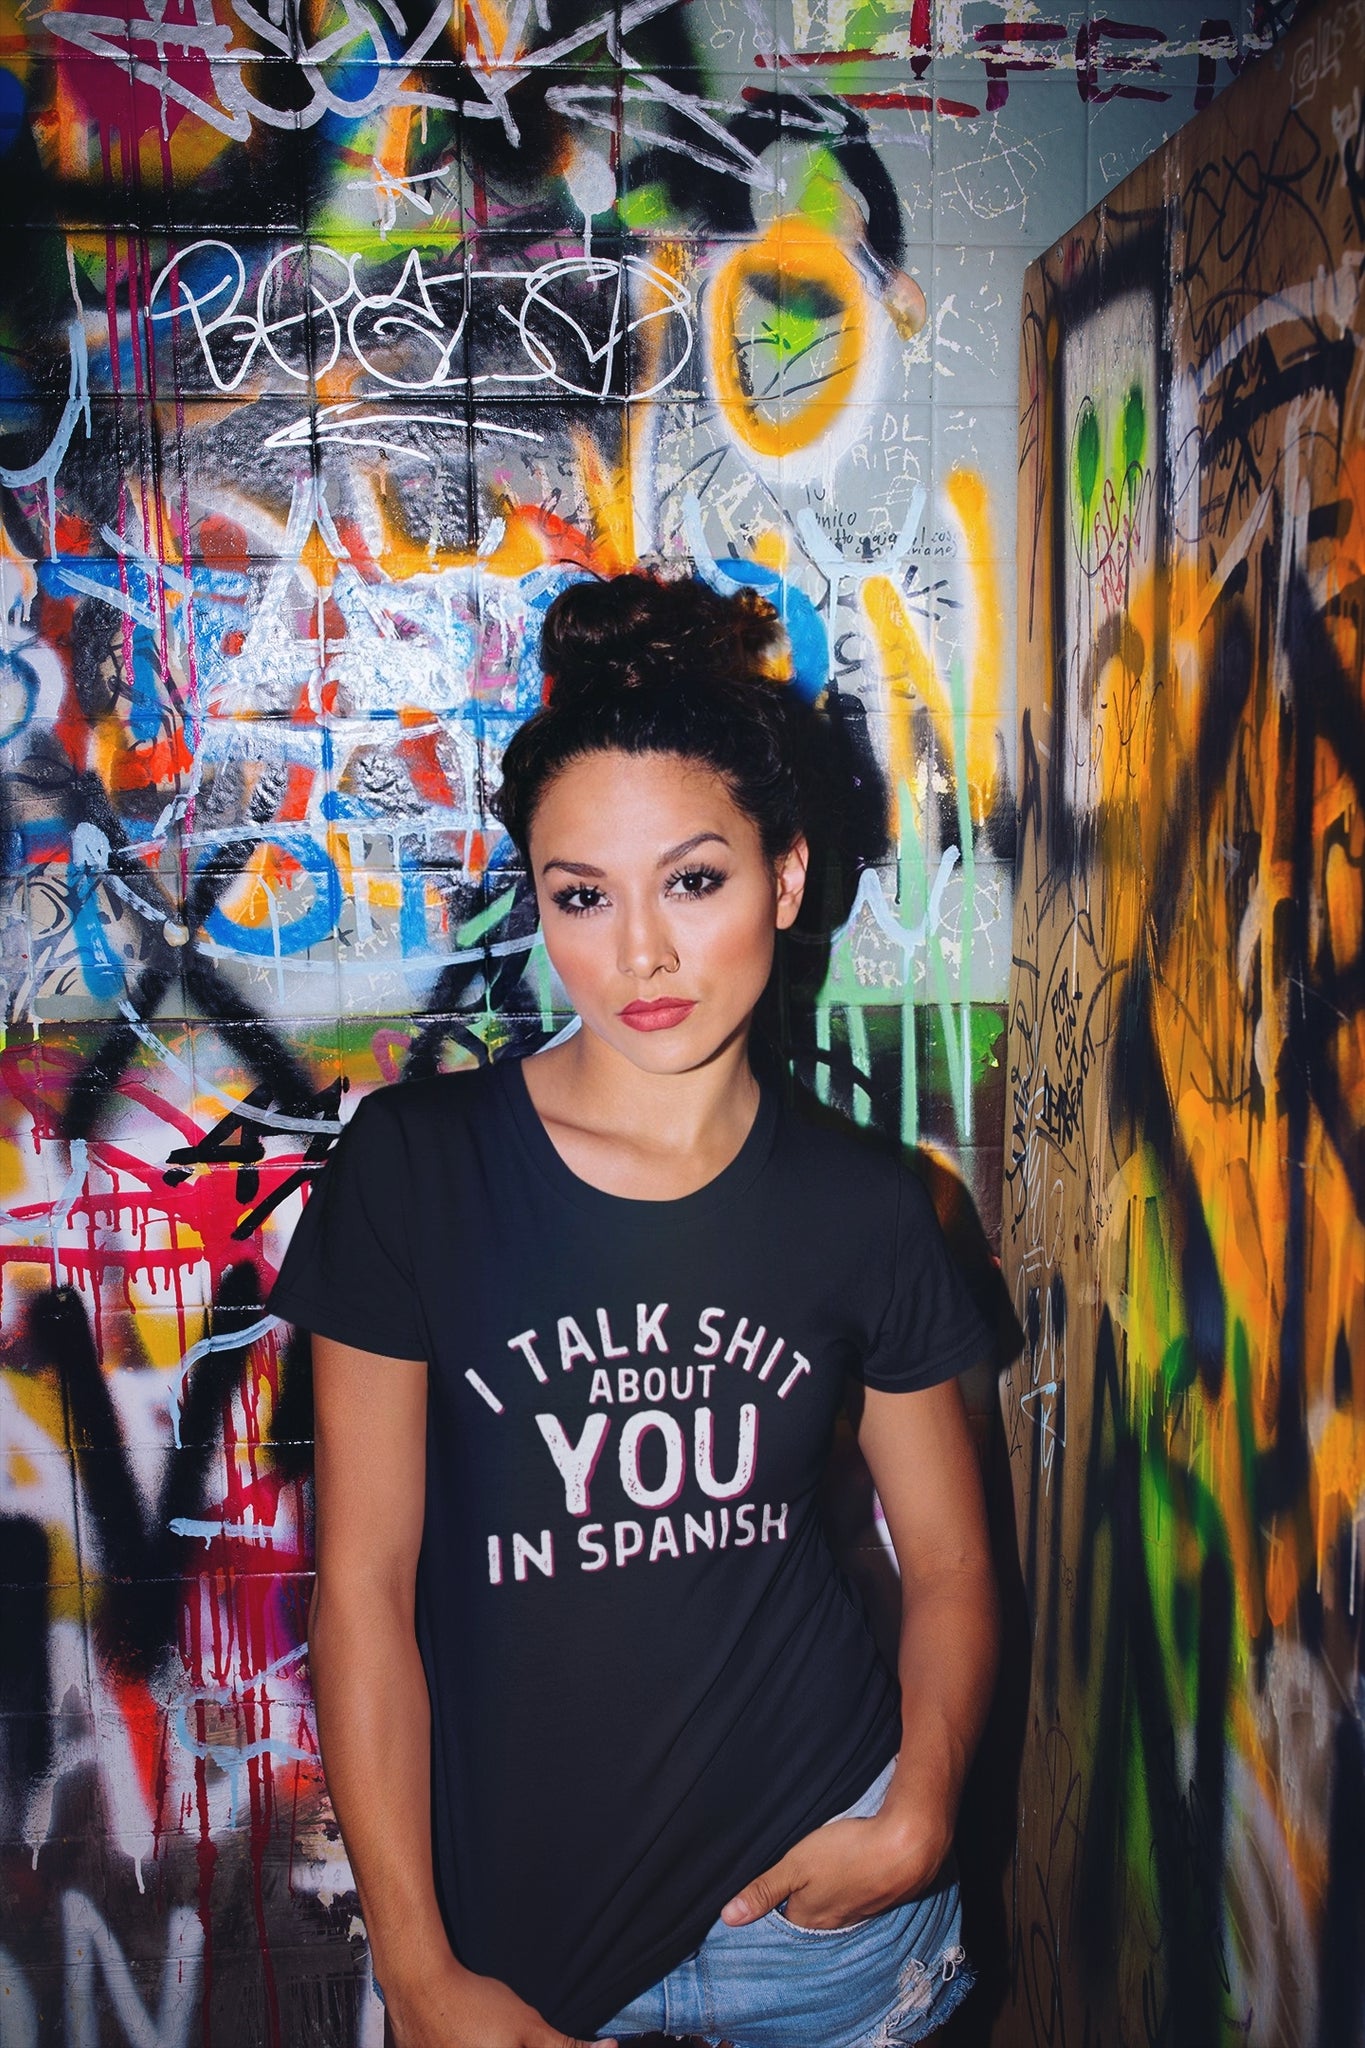 Latina woman wearing a Humorous black  t-shirt  with 'I talk shit about you in Spanish' text design